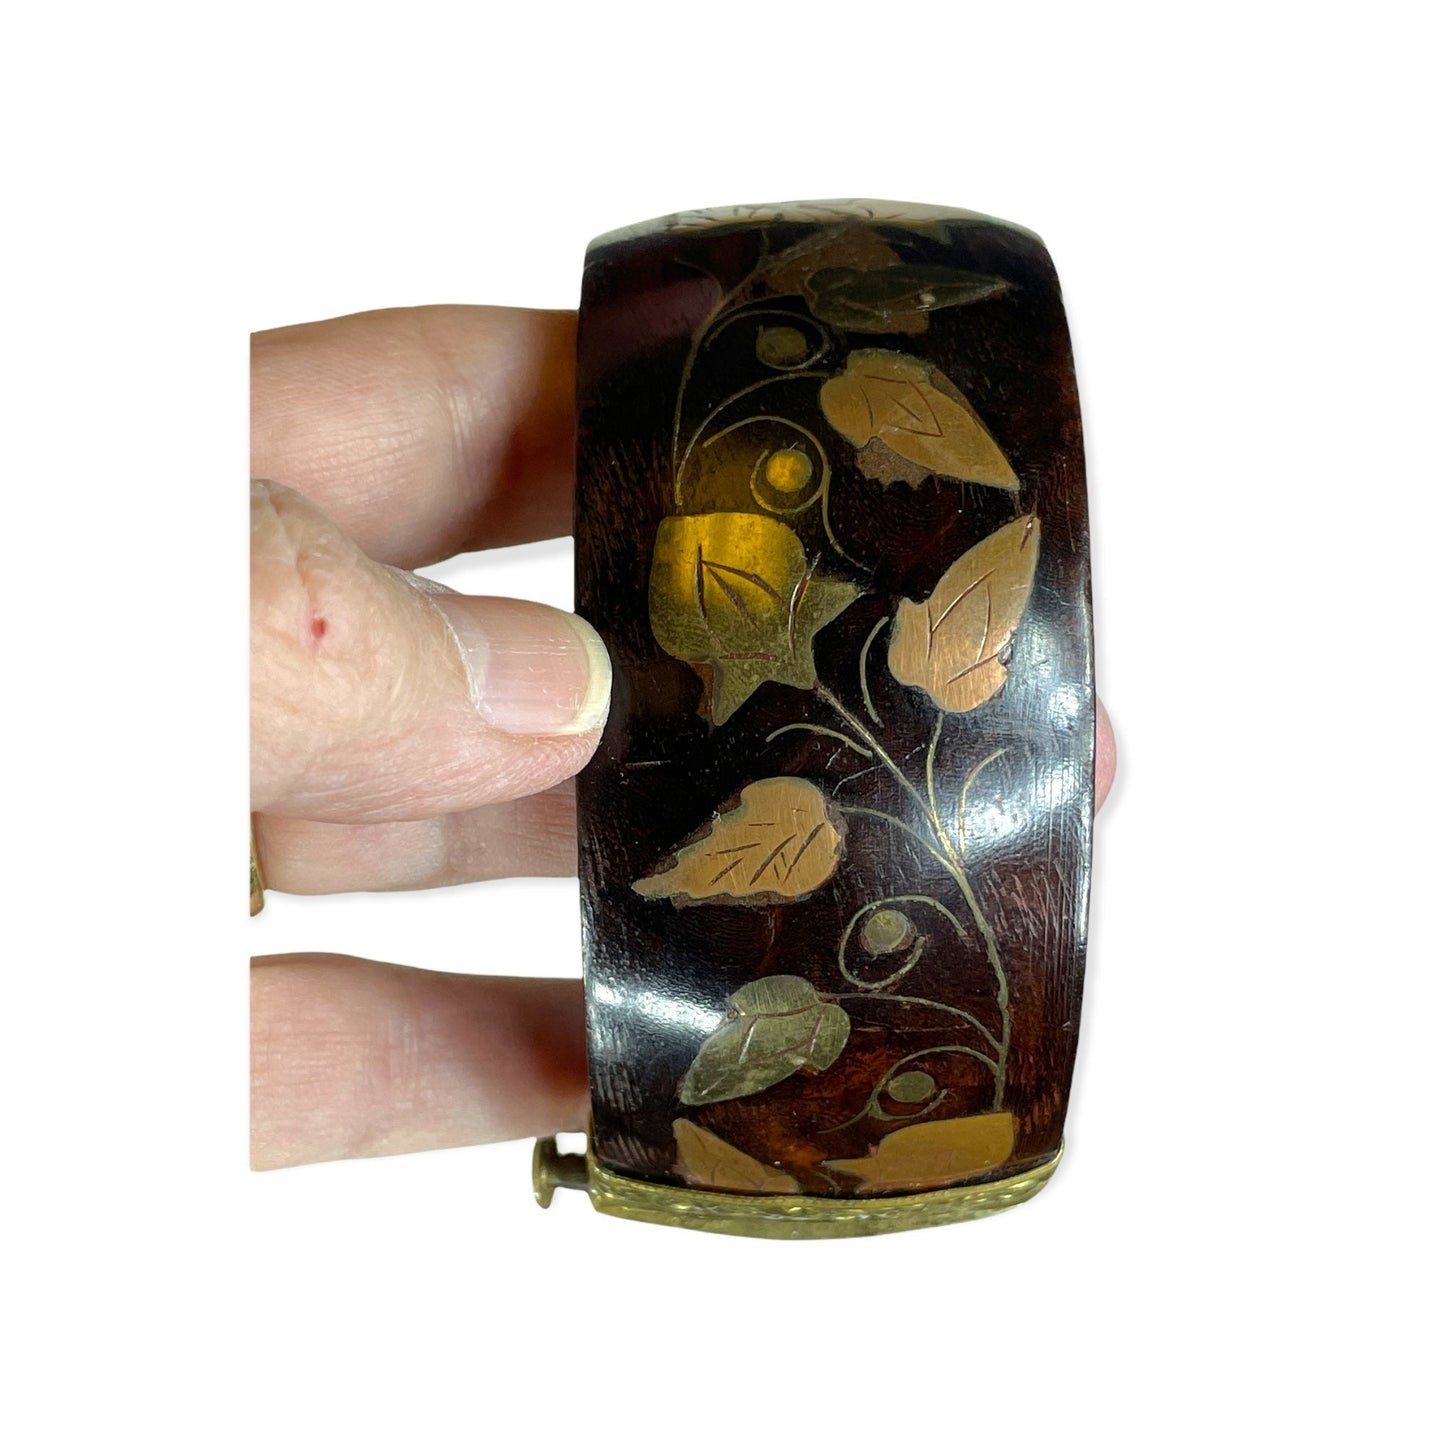 Wide wooden bangle bracelet with copper and brass floral inlay design